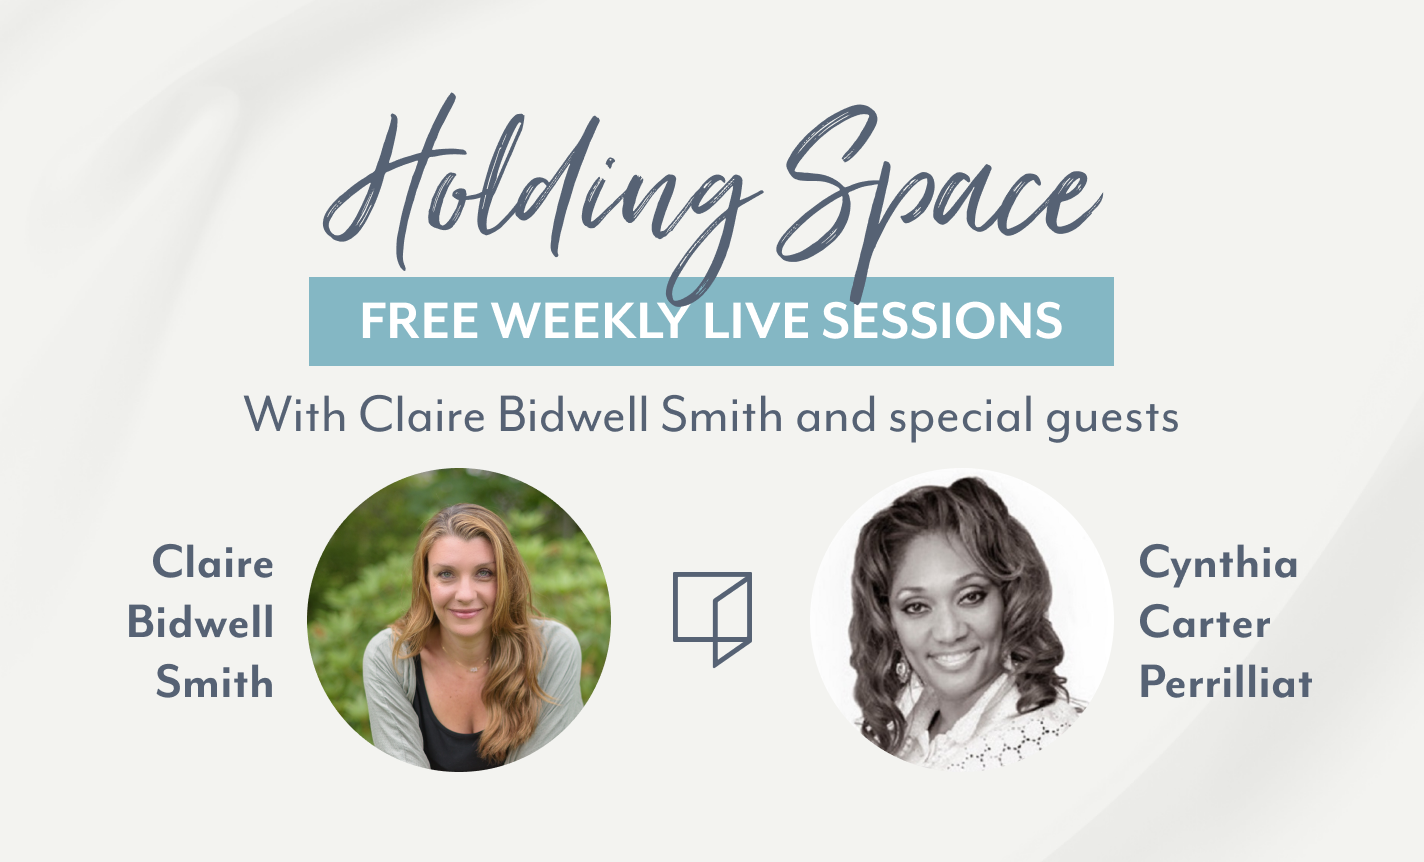 Holding Space: Claire Bidwell SmithCynthia Carter Perrilliat